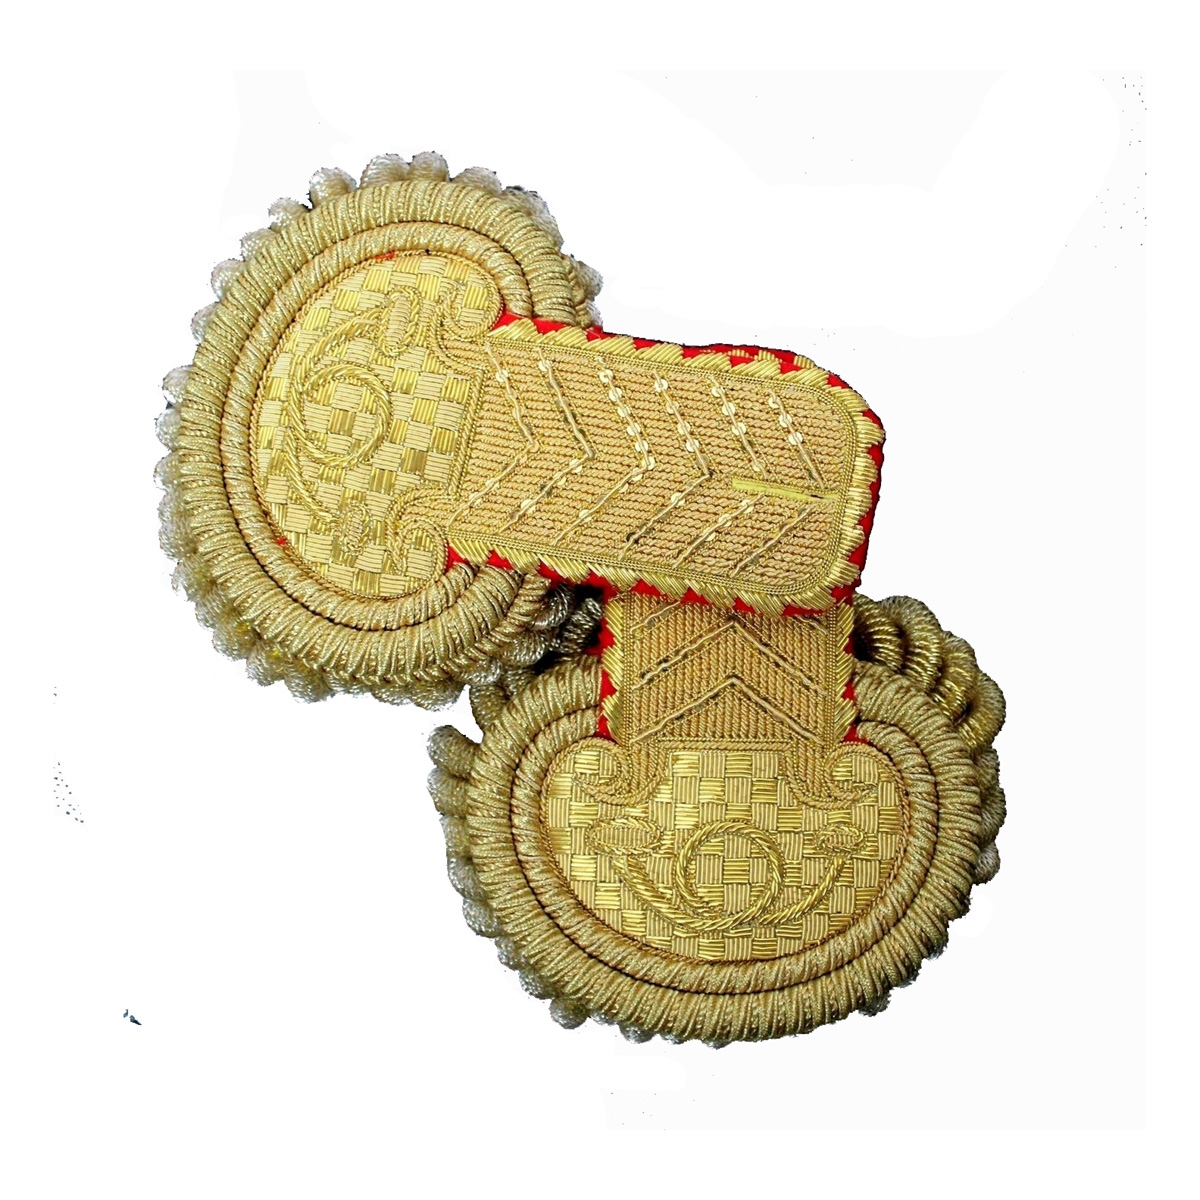 favourite Epaulettes for colonel gold and red color hand embroidery bullion wire